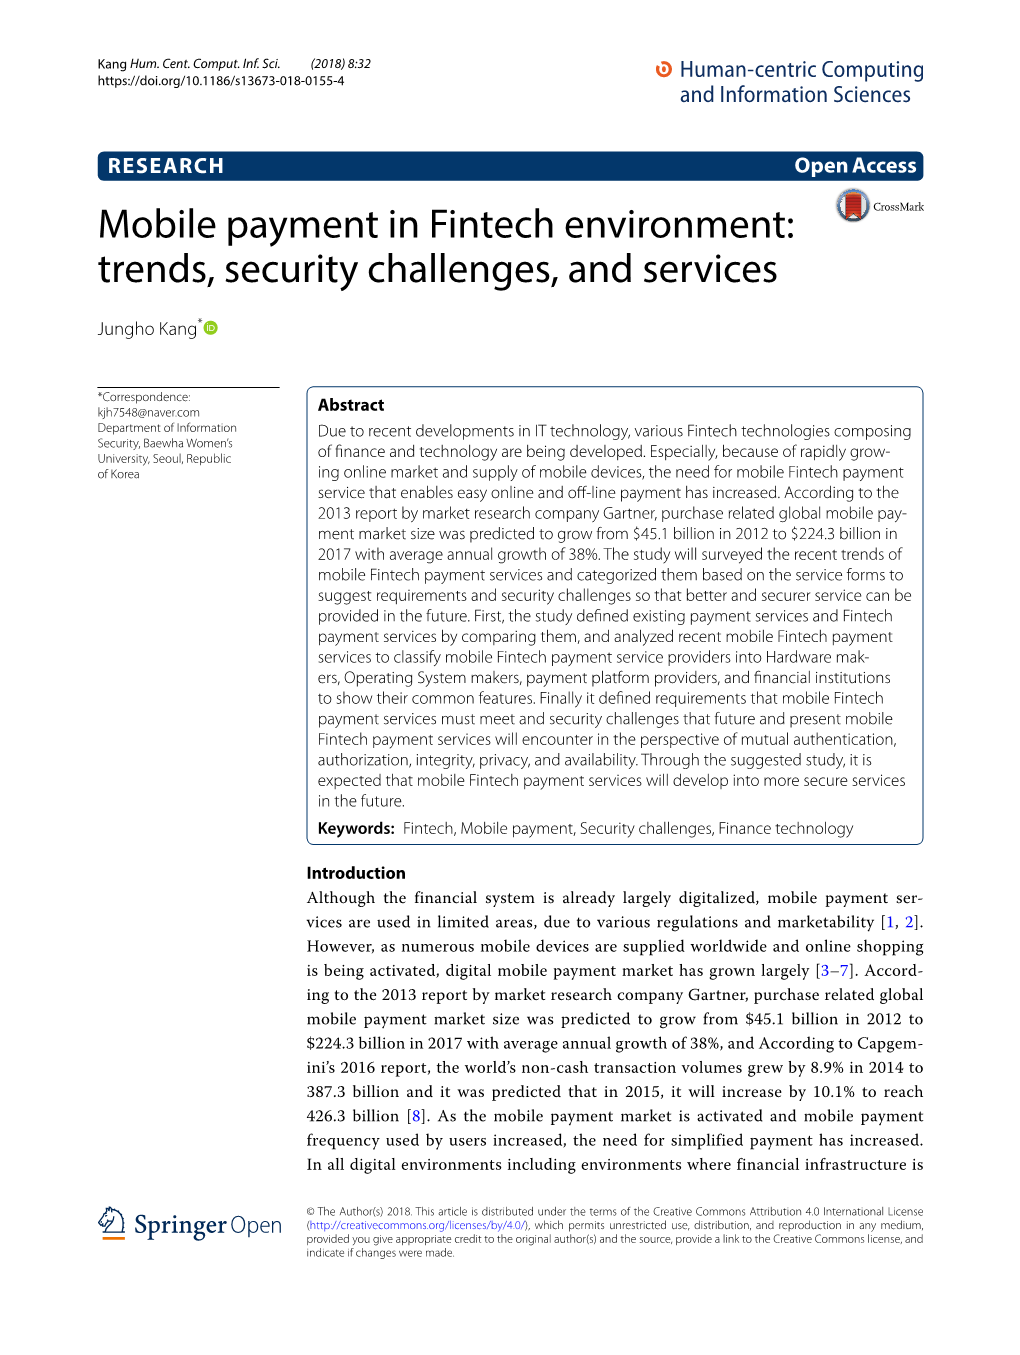 Mobile Payment in Fintech Environment: Trends, Security Challenges, and Services